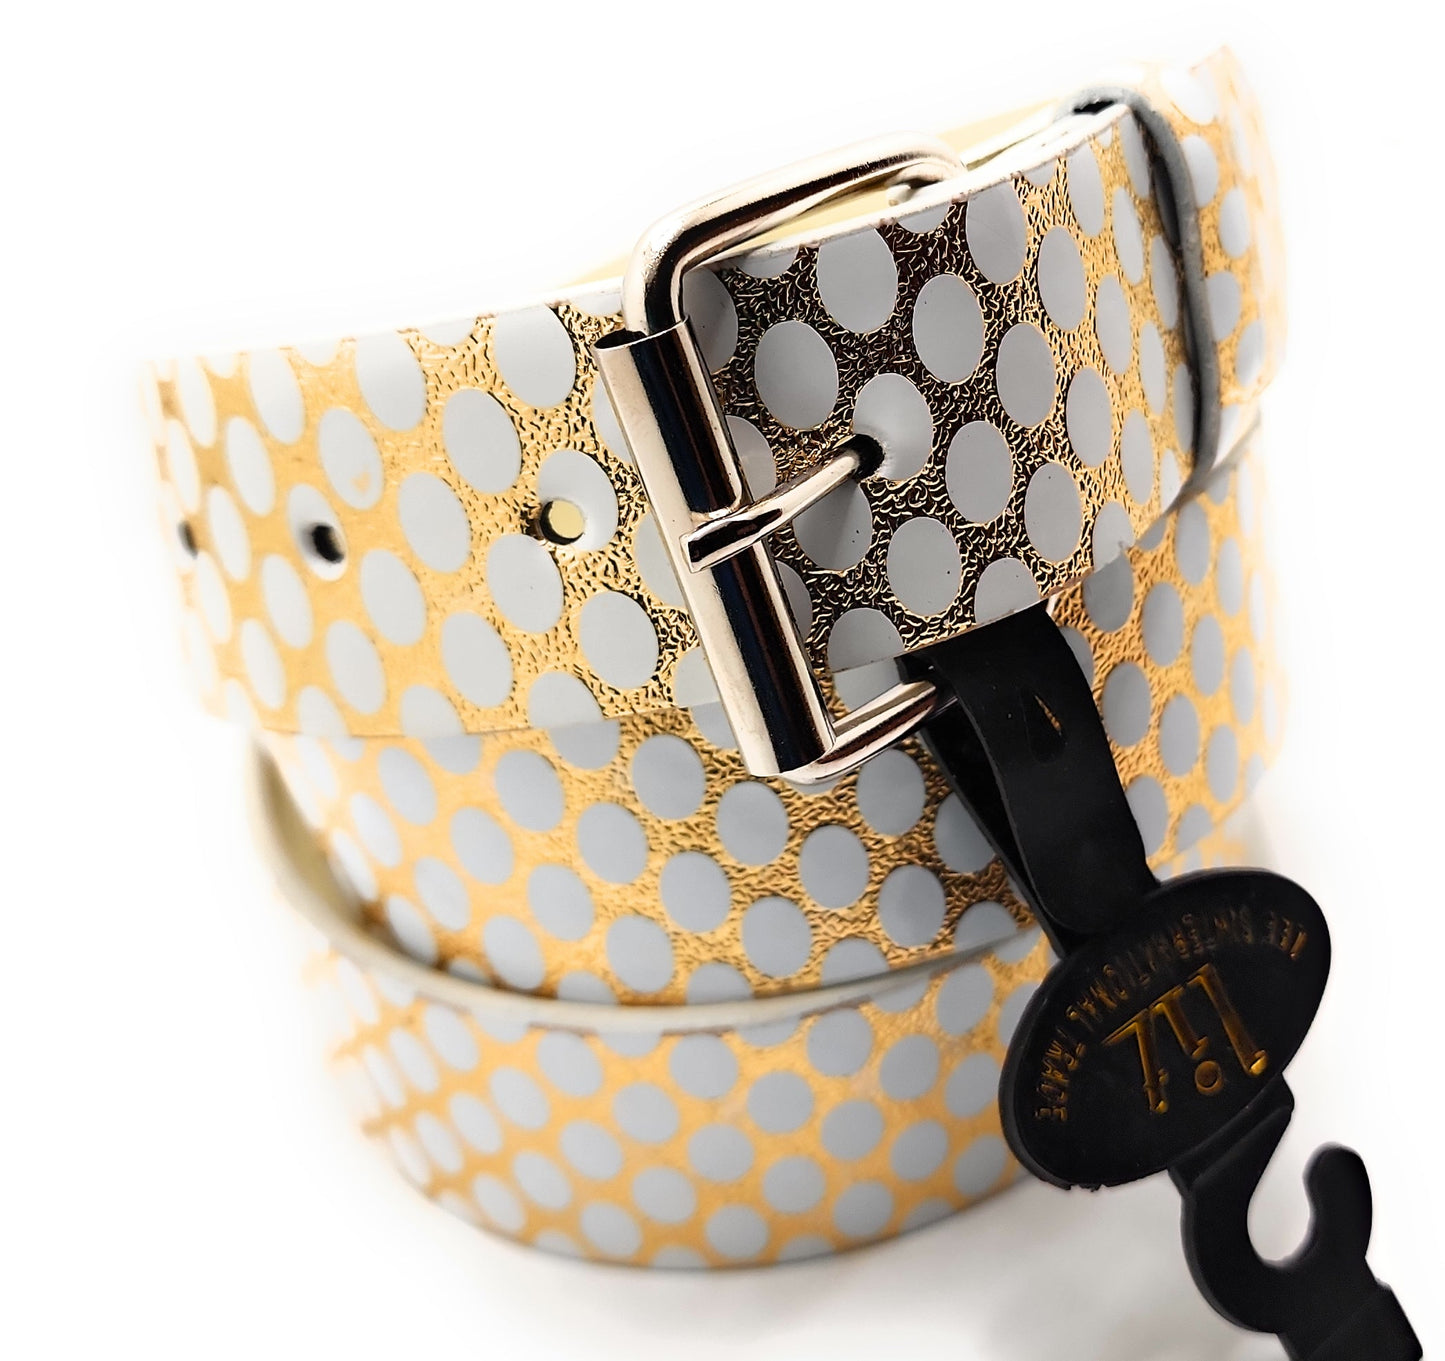 White and Gold Ovals on White Leather Belt shop.AxeDr.com belt, Genuine Leather, Gift for Him, gold, shiny, white